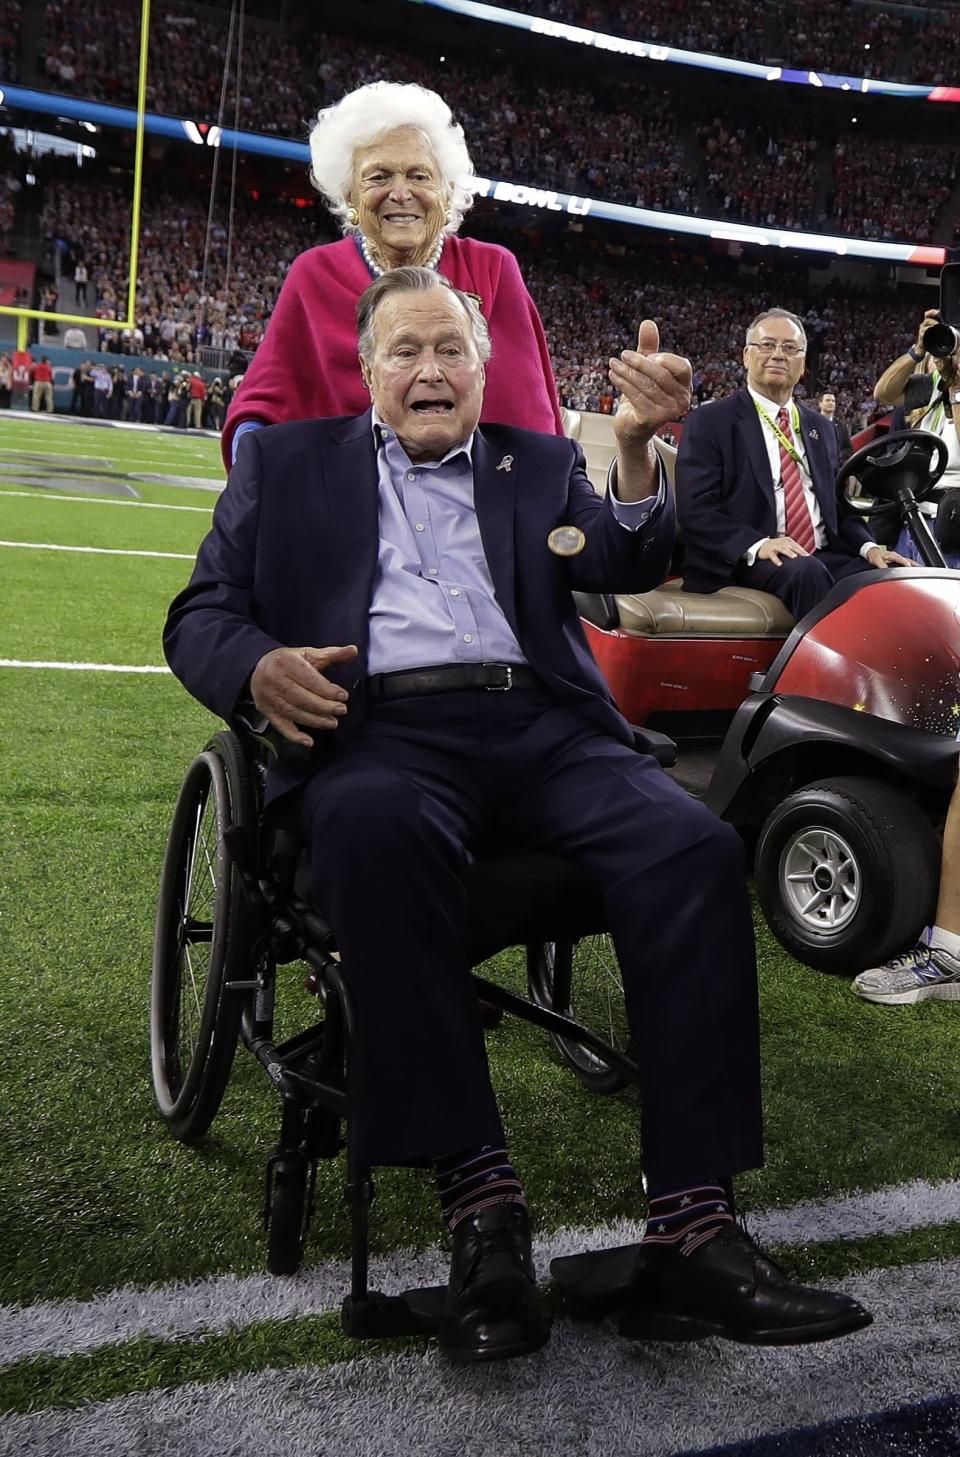 Former President George H.W. Bush and wife, Barbara, walk off the field before the NFL Super Bowl 51 football game between the Atlanta Falcons and the New England Patriots Sunday, Feb. 5, 2017, in Houston. (AP Photo/David J. Phillip)&nbsp; (Photo: ASSOCIATED PRESS)